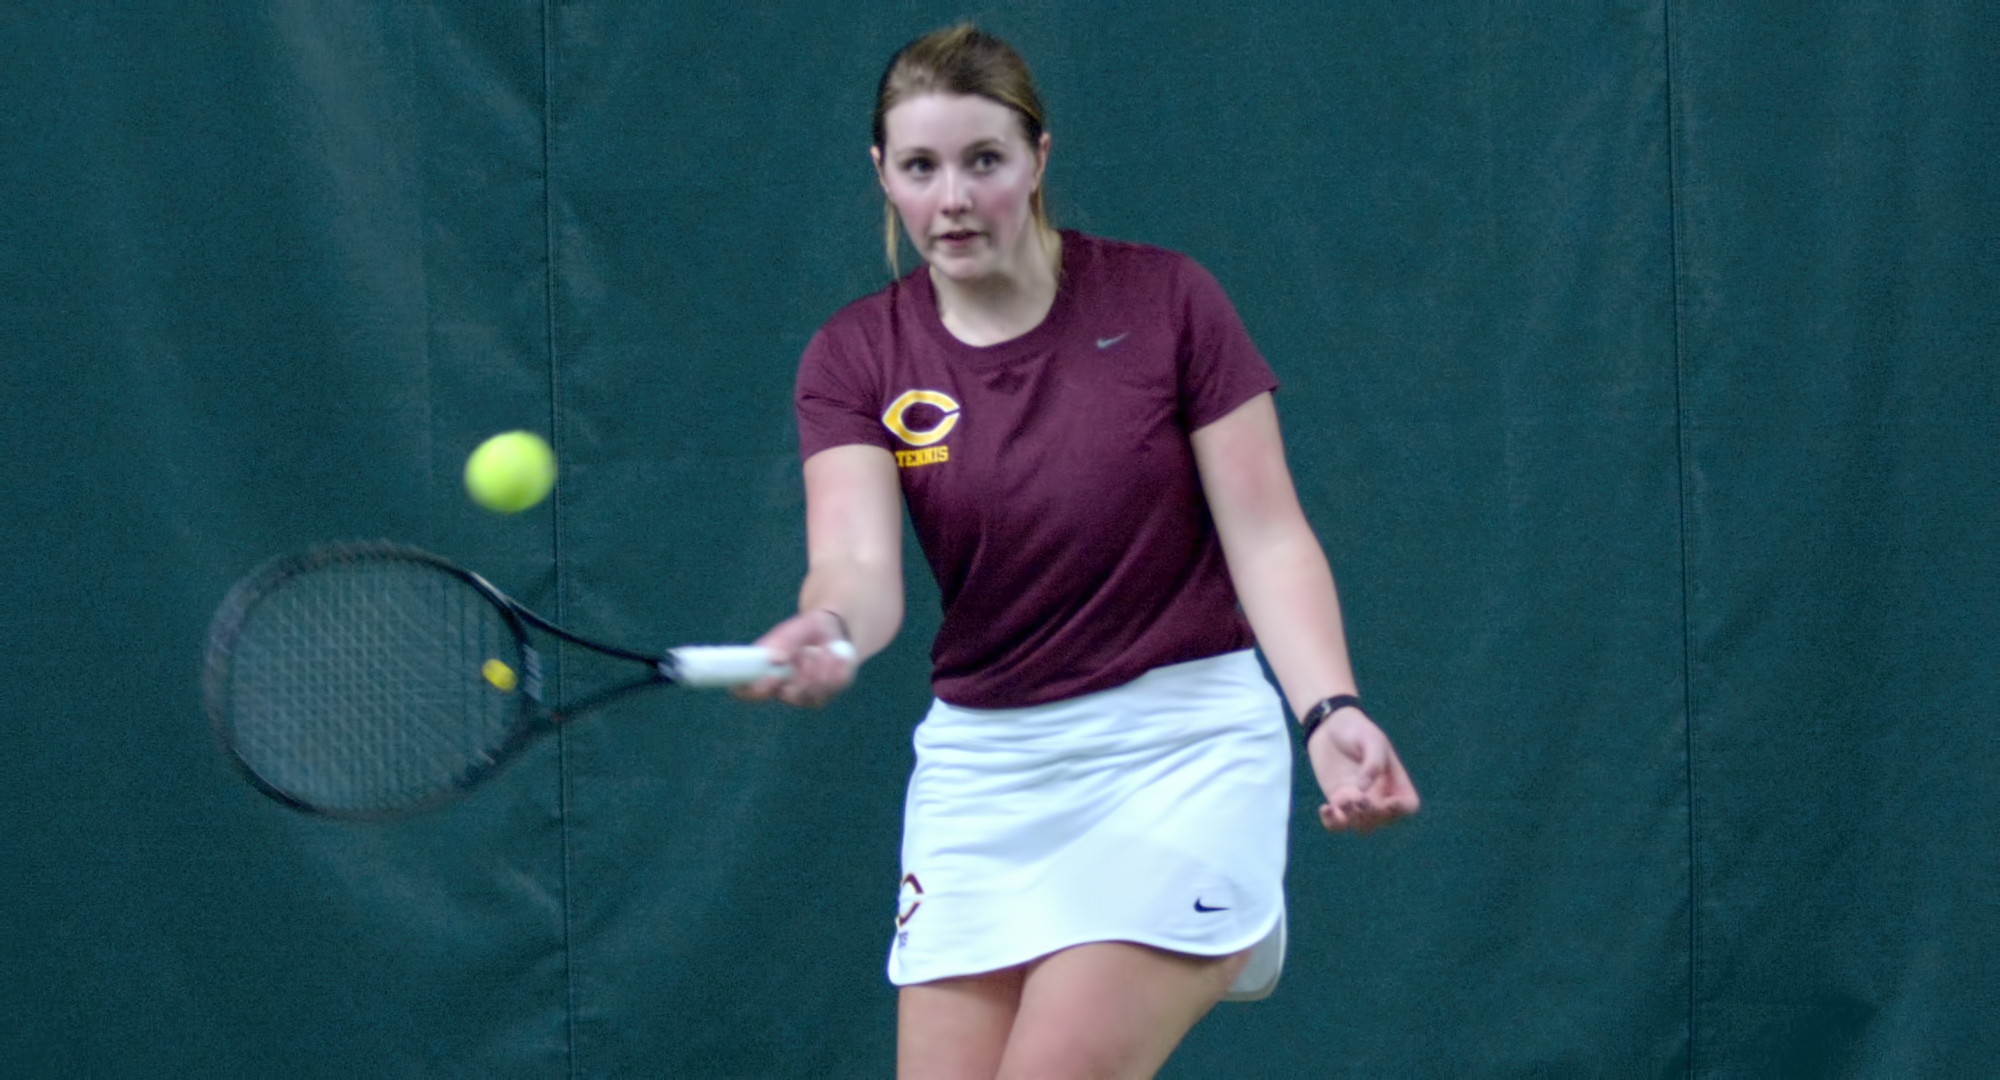 Junior Kendra Stoick was the only Cobber to claim a win in the team's match at Macalaster as she won 2-6, 7-5, 10-7 at No.2 singles.